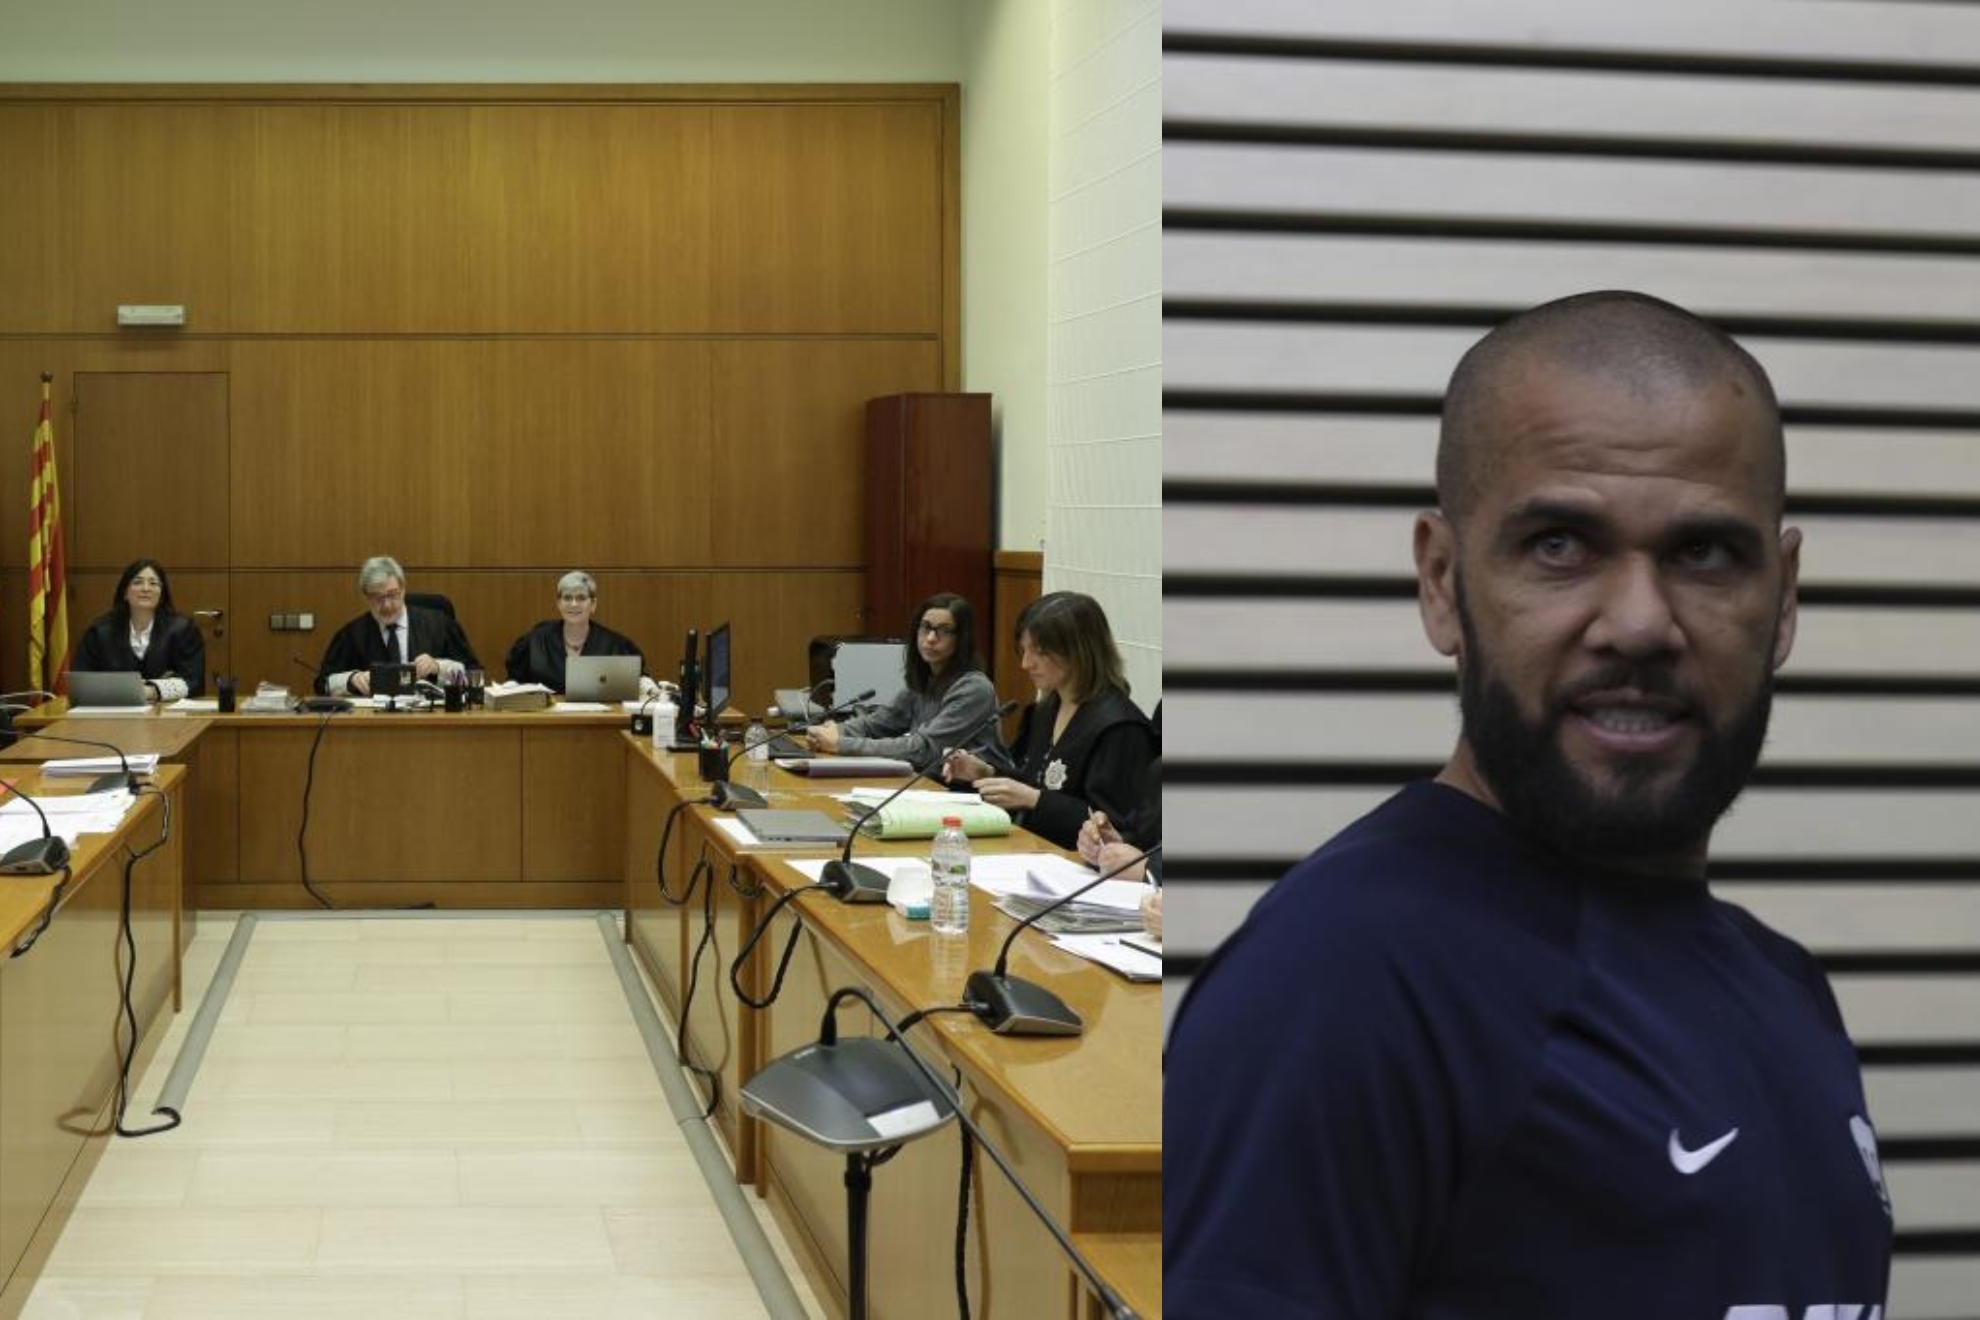 The Court of Appeals rules that Dani Alves will remain custody without bail